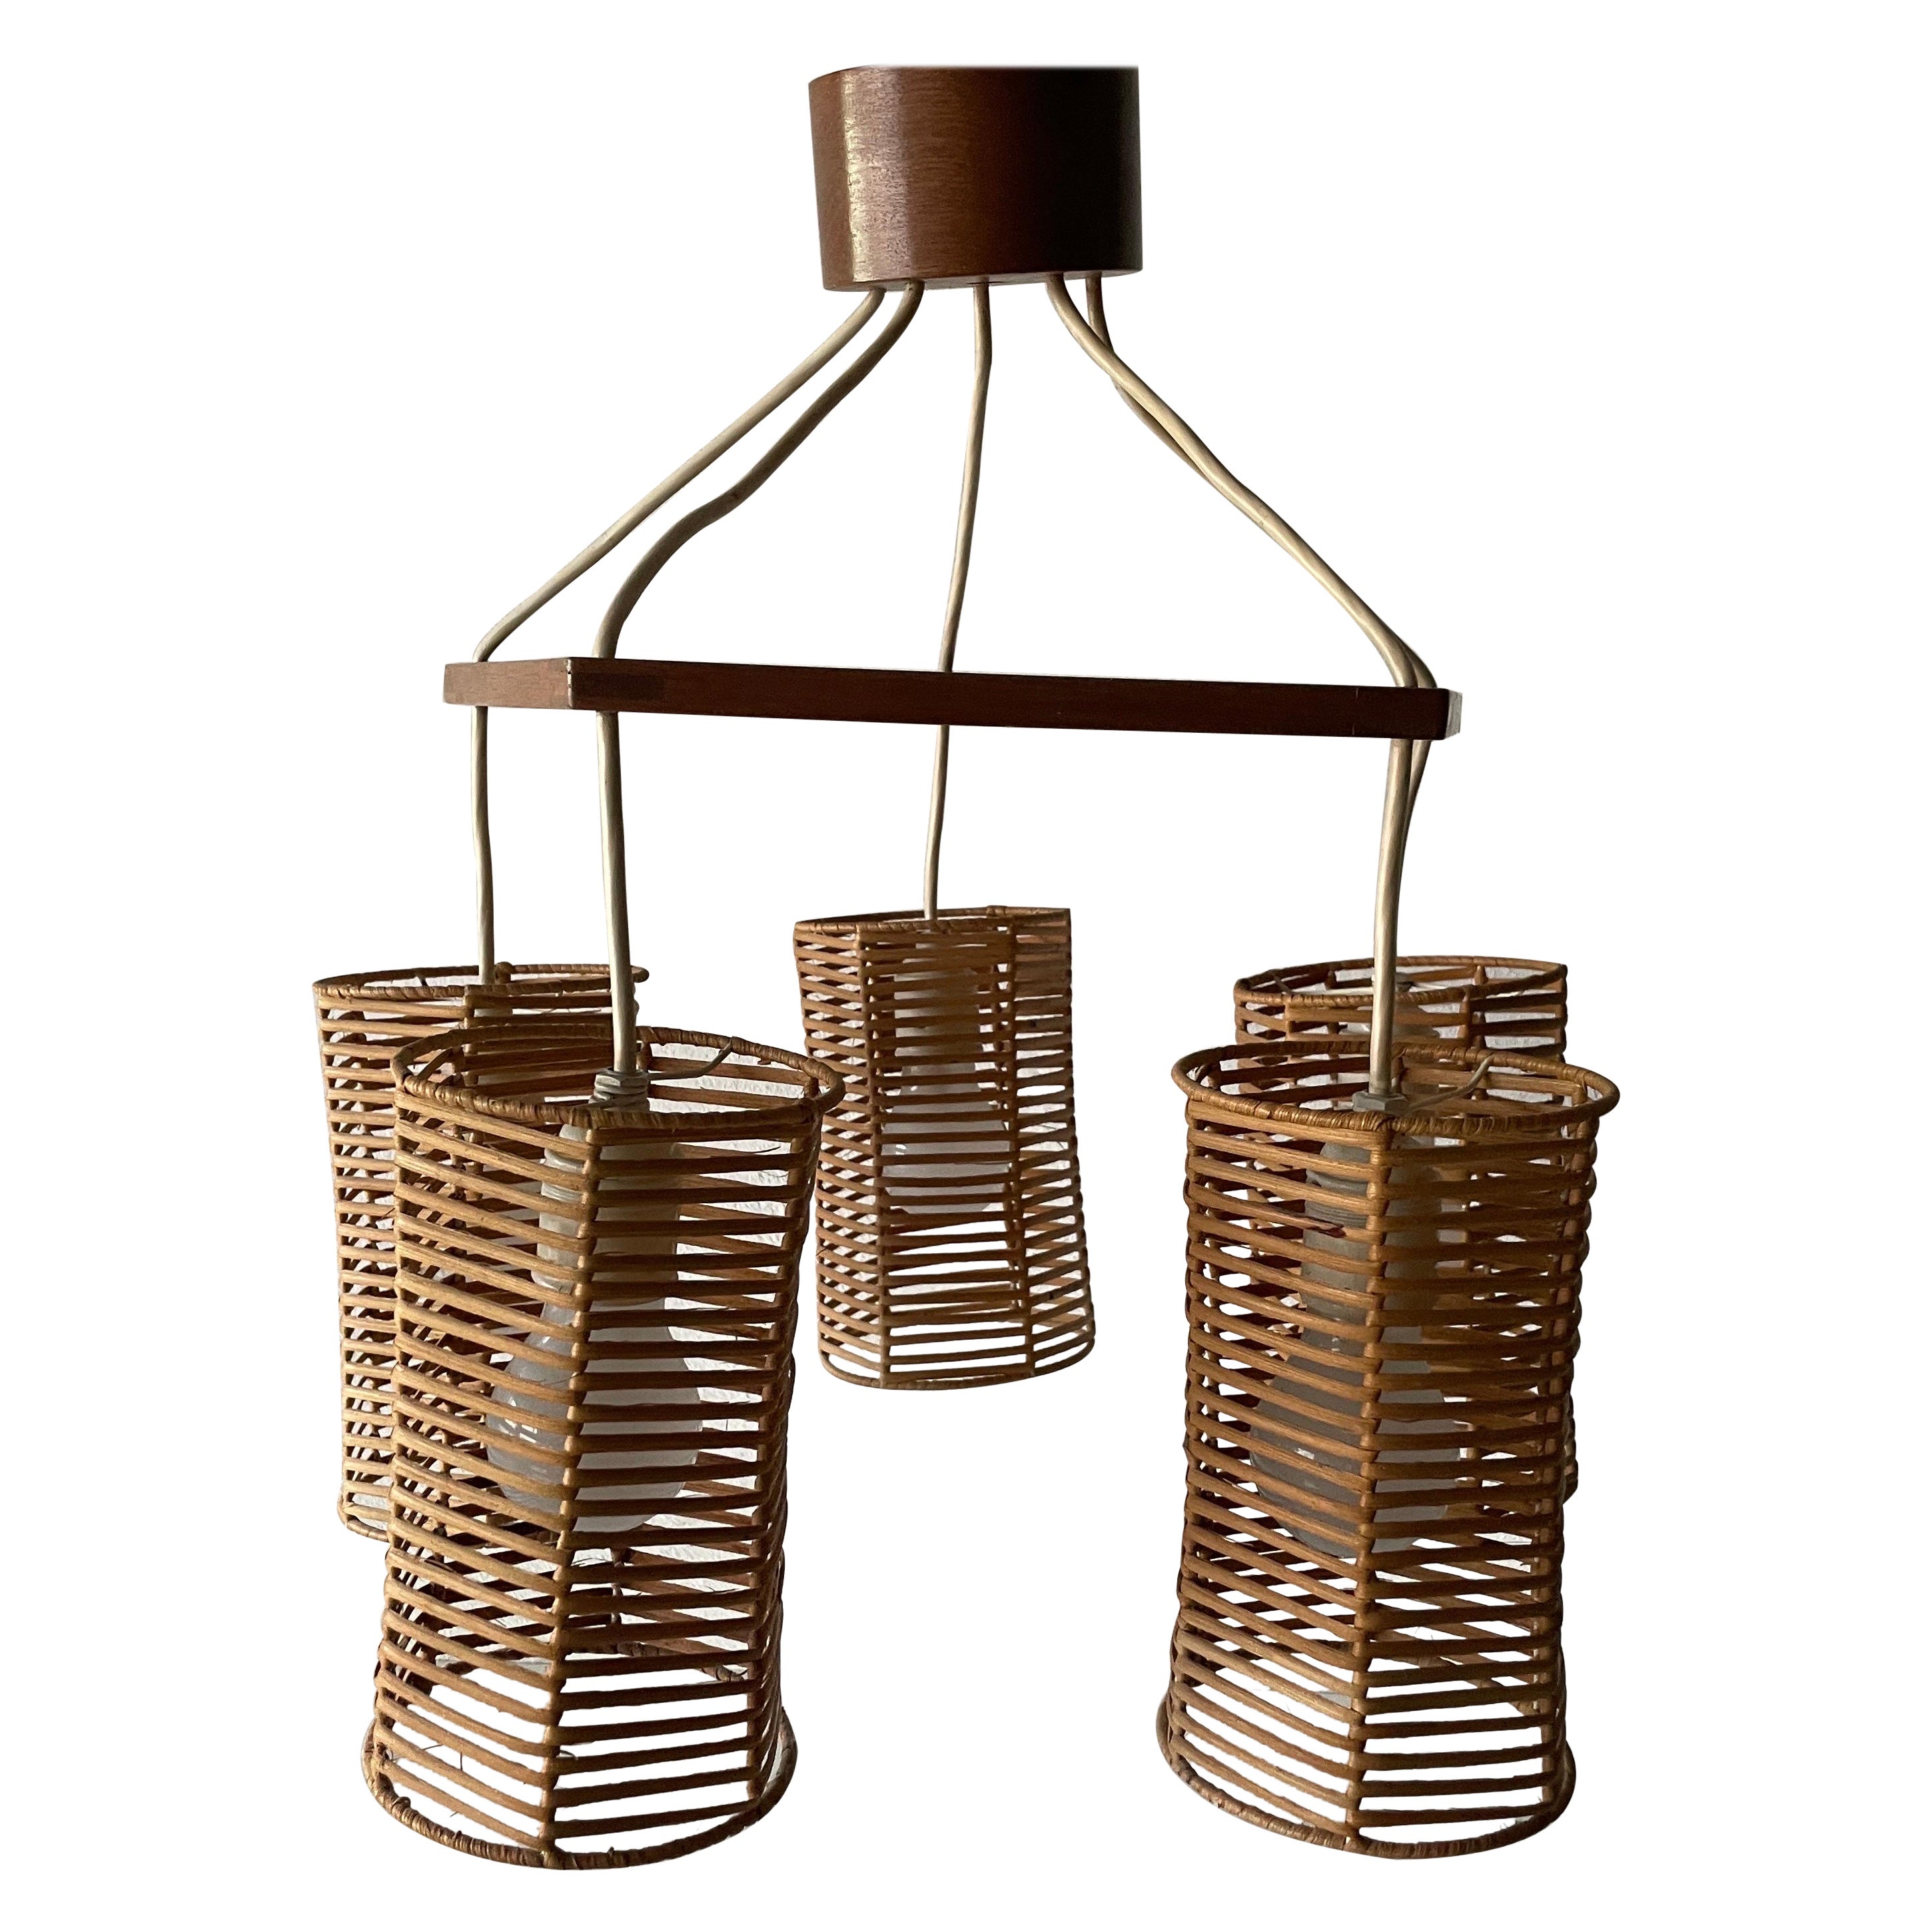 5-head Wicker and Wood Pendant Lamp, 1960s, Germany For Sale